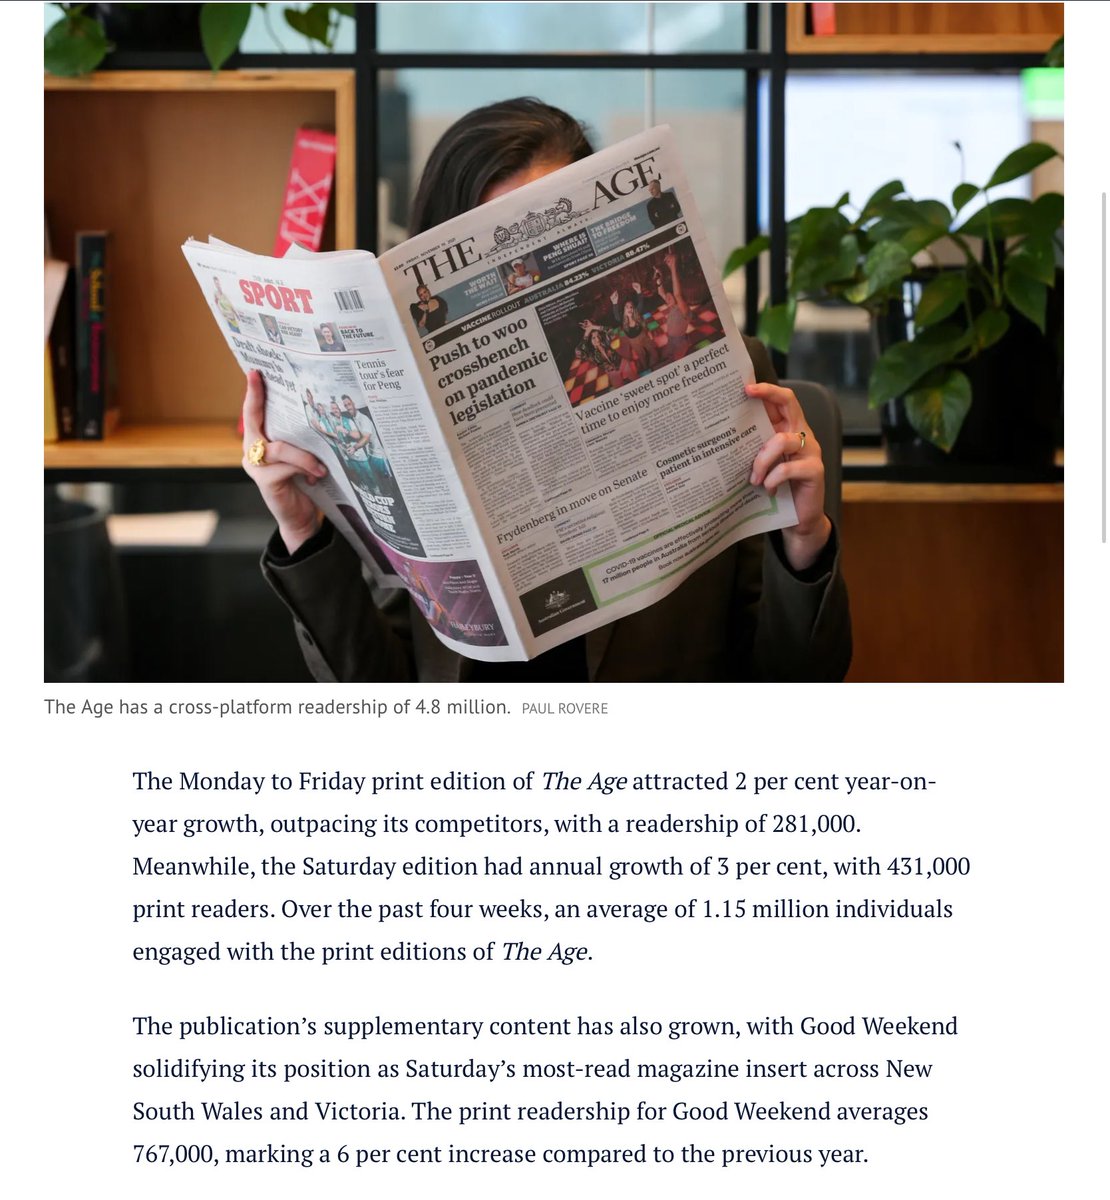 Who's lying here? @theheraldsun & @theage both claim to be the most read newspaper in Victoria. I swear this happens every time the circulation figures are released. The Age claims 4.8 million digital & print reach. The Herald Sun claims 4.002 million. The Age wins? #ausmedia 📰